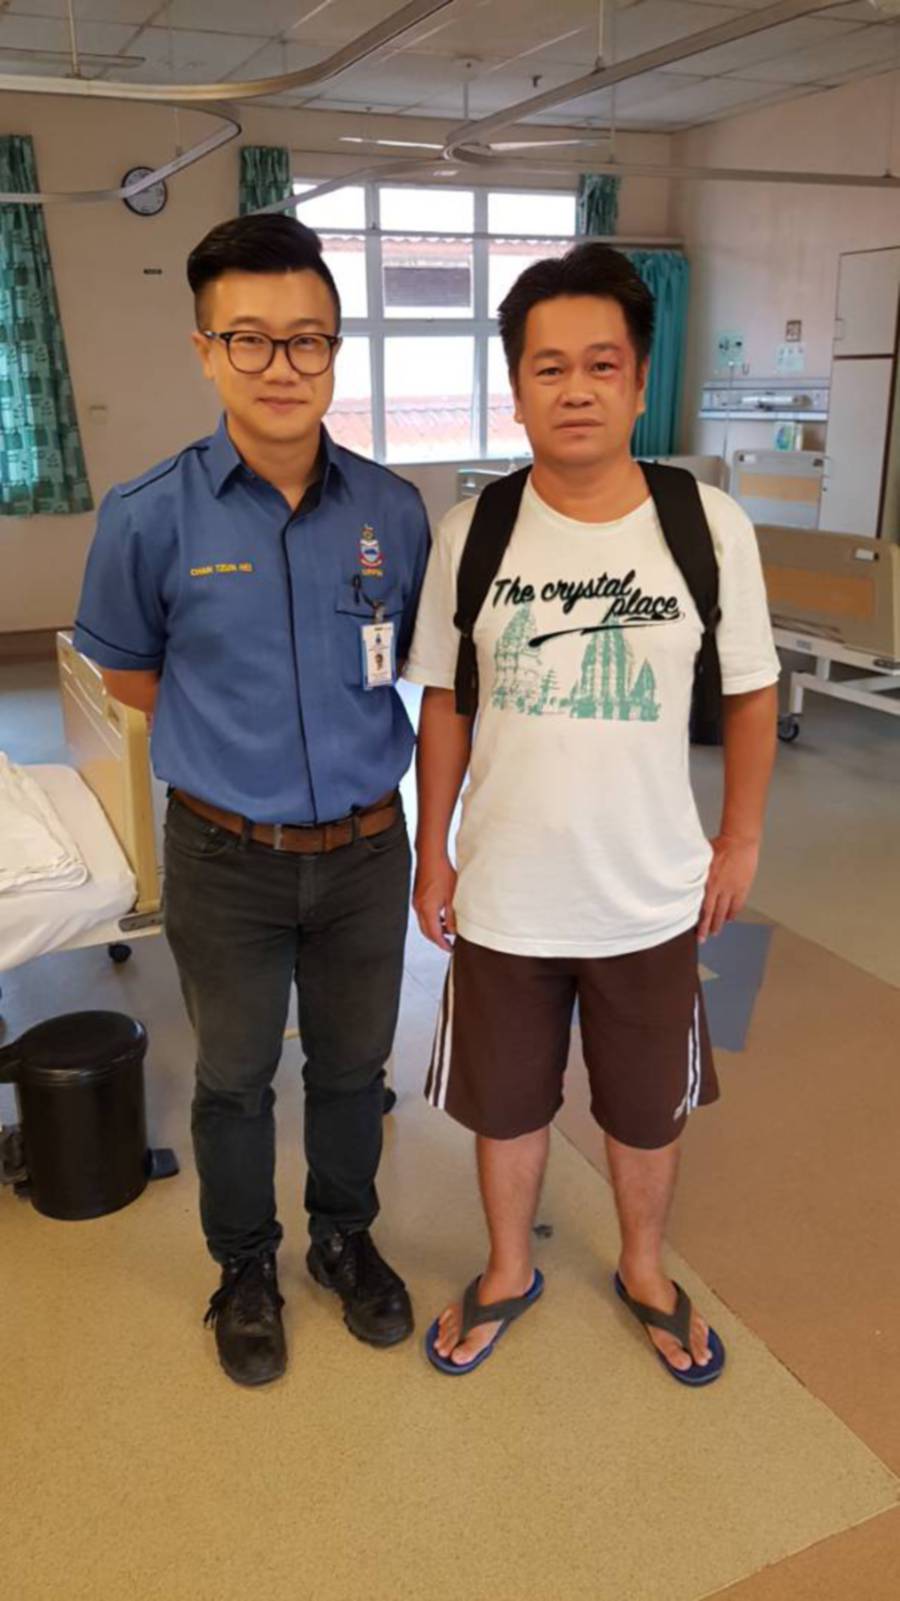 Elopura Constituency Development leader Chan Tzun Hei (left) with Abdul Asrah, father of Hafiz Abdul Asrah. Hafiz was stabbed with a sharp object after failing to surrender money by several youths at Bandar Utama, Sandakan, Sabah last Friday. Pix by Awang Ali Omar